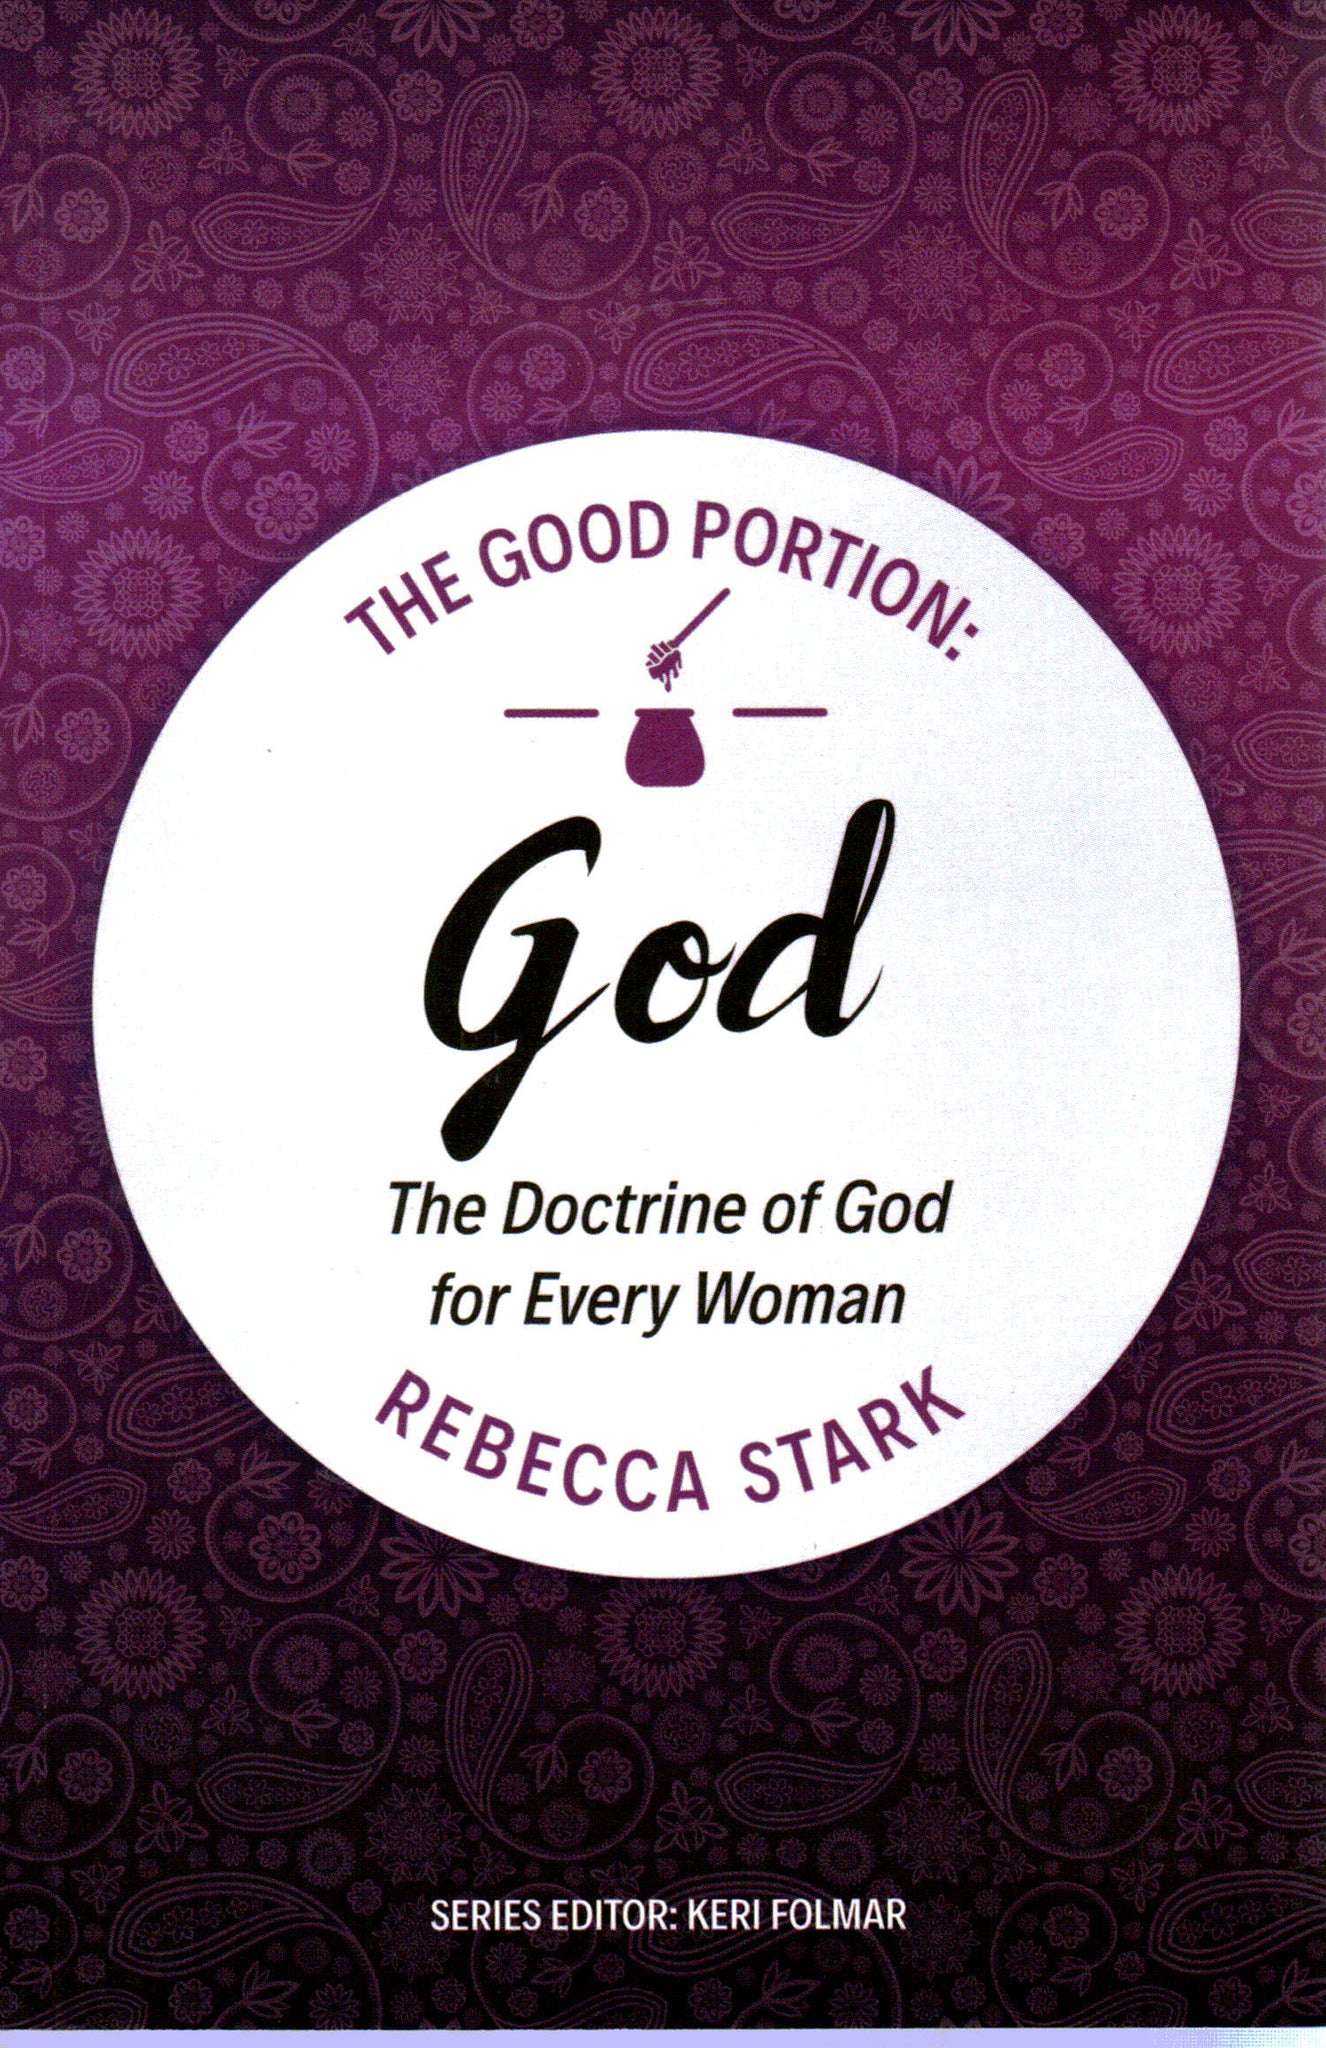 The Good Portion - God: The Doctrine of God for Every Woman